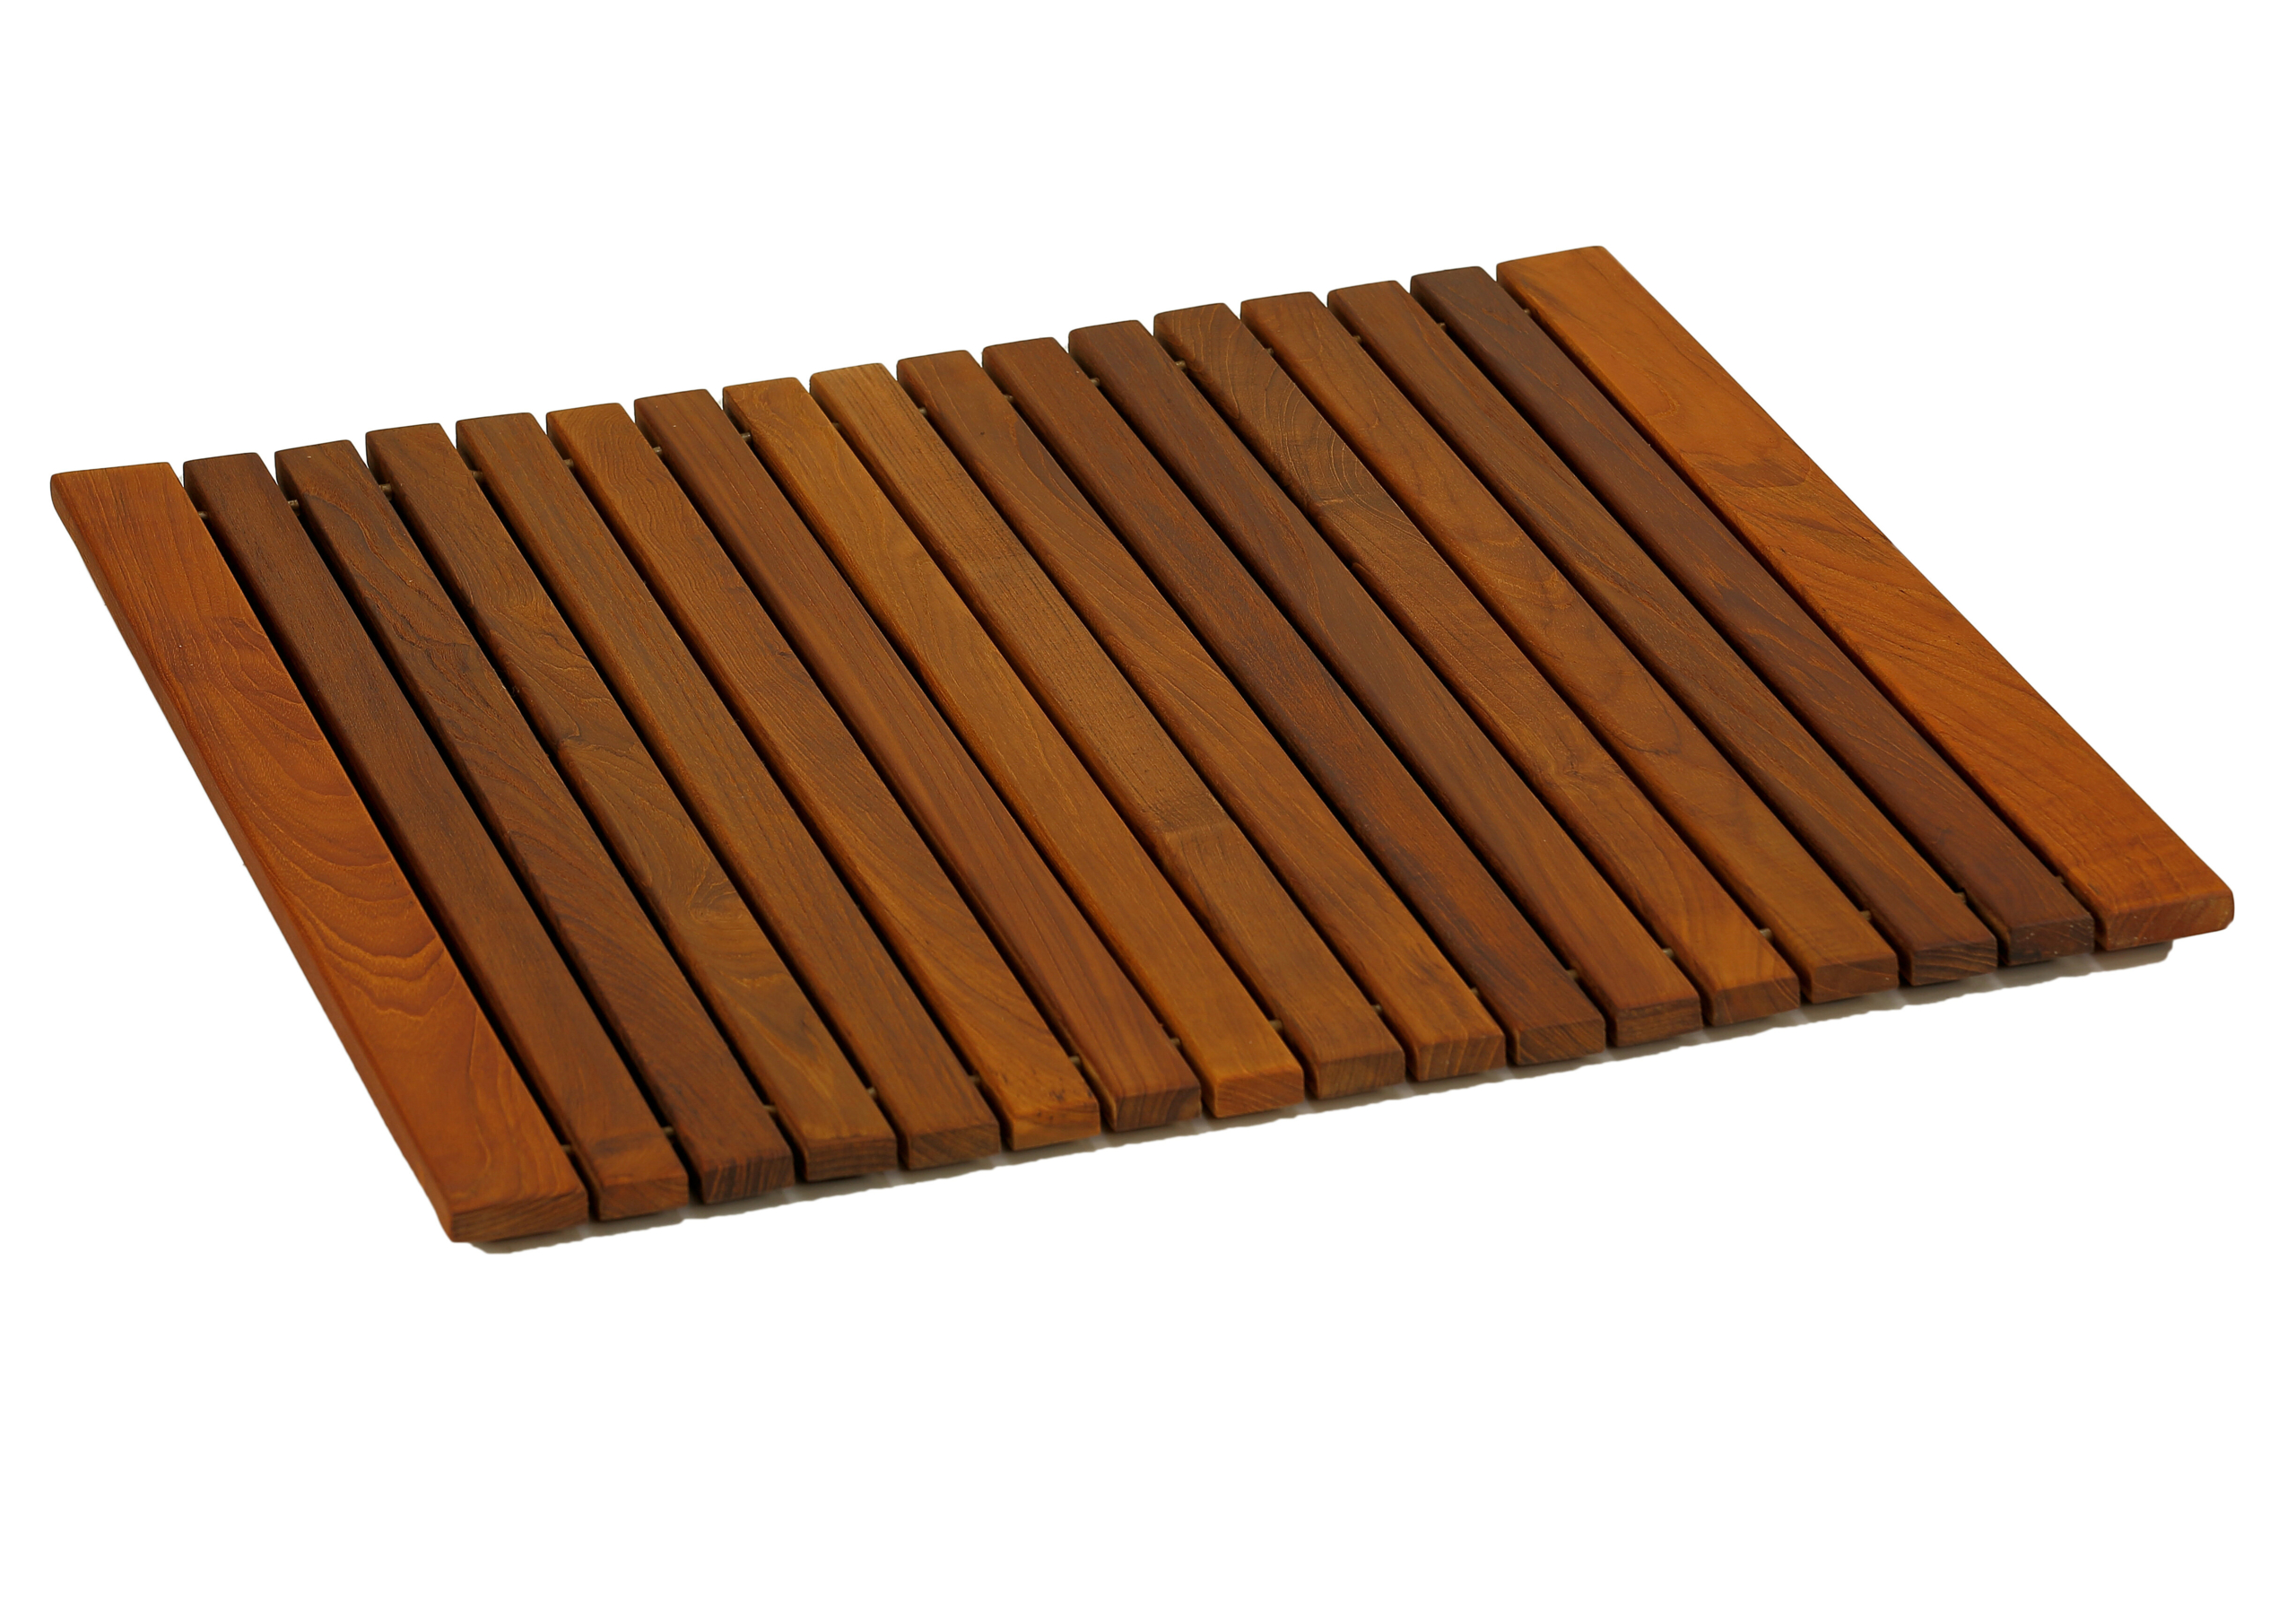 Bare Decor Zen Spa Shower Or Door Mat In Solid Teak Wood And Oiled Finish 31.5